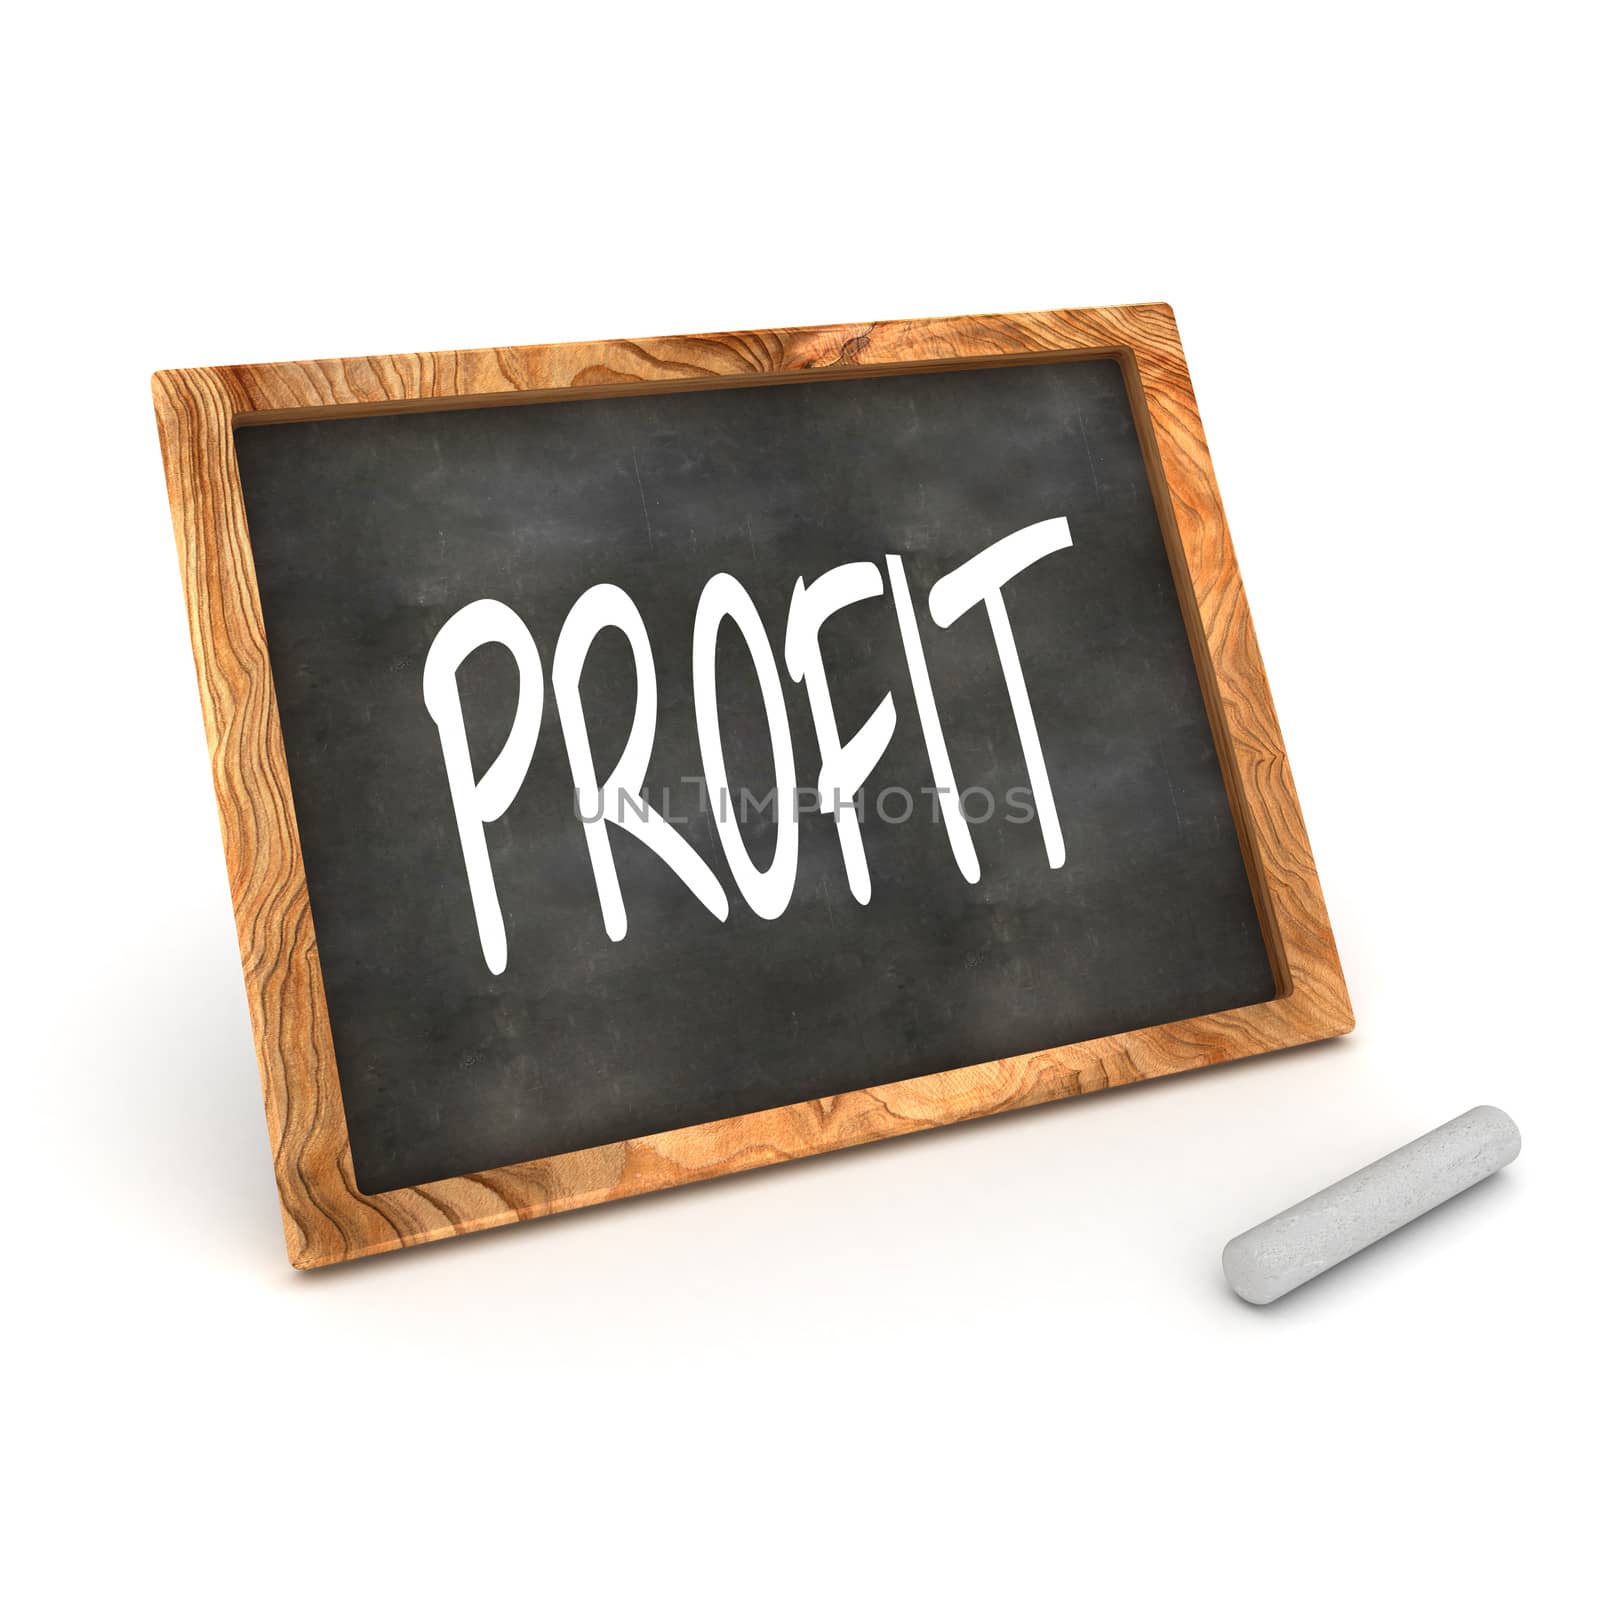 A Colourful 3d Rendered Concept Illustration showing "Profit" writen on a Blackboard with white chalk